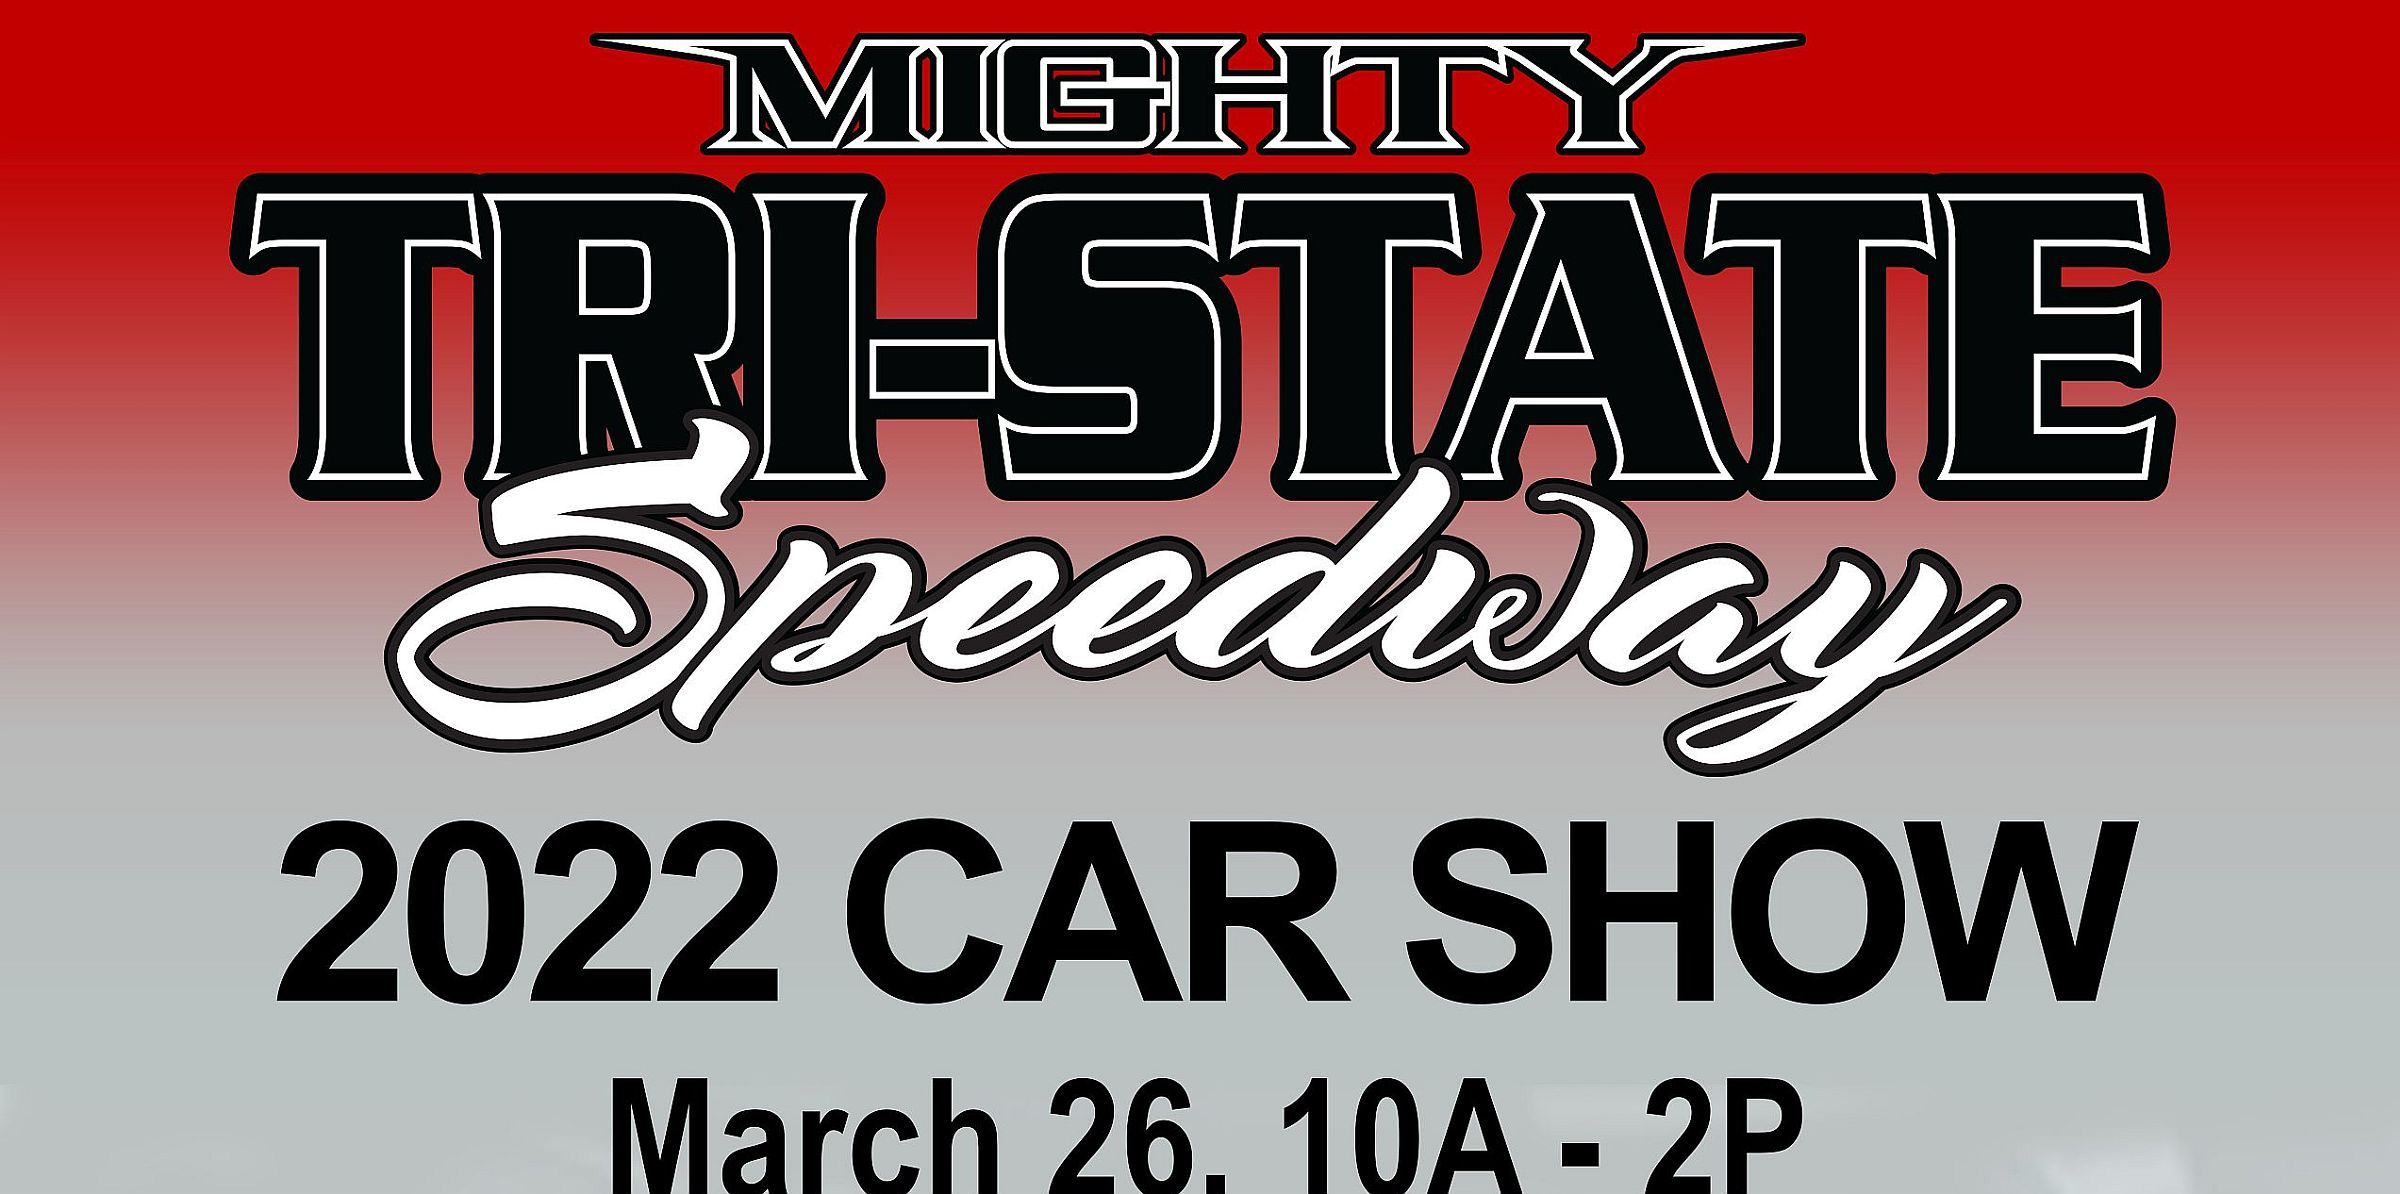 2022 Car Show Information Released!